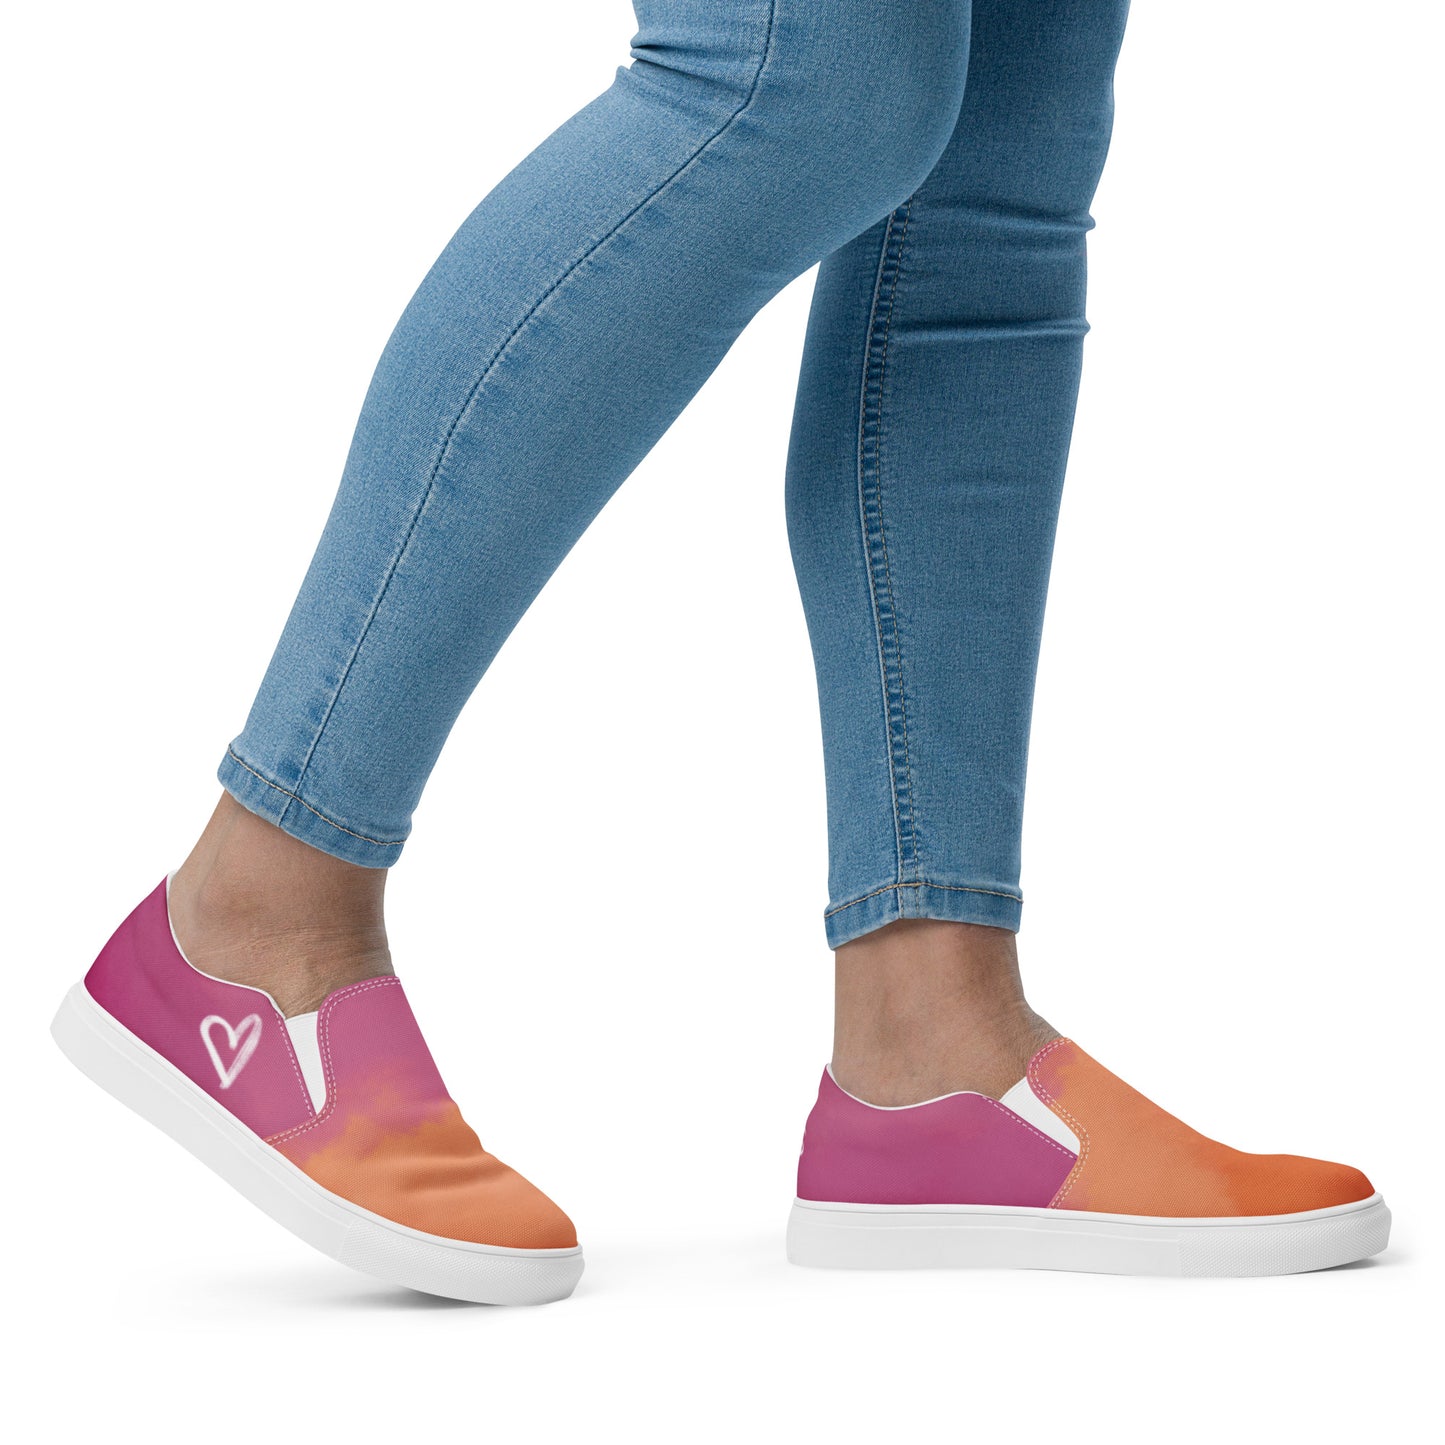 Right view: A model wears a pair of slip on canvas shoes with the colors of the lesbian pride flag in a cloudy texture, a white heart on the side, and the Aras Sivad logo on the back.